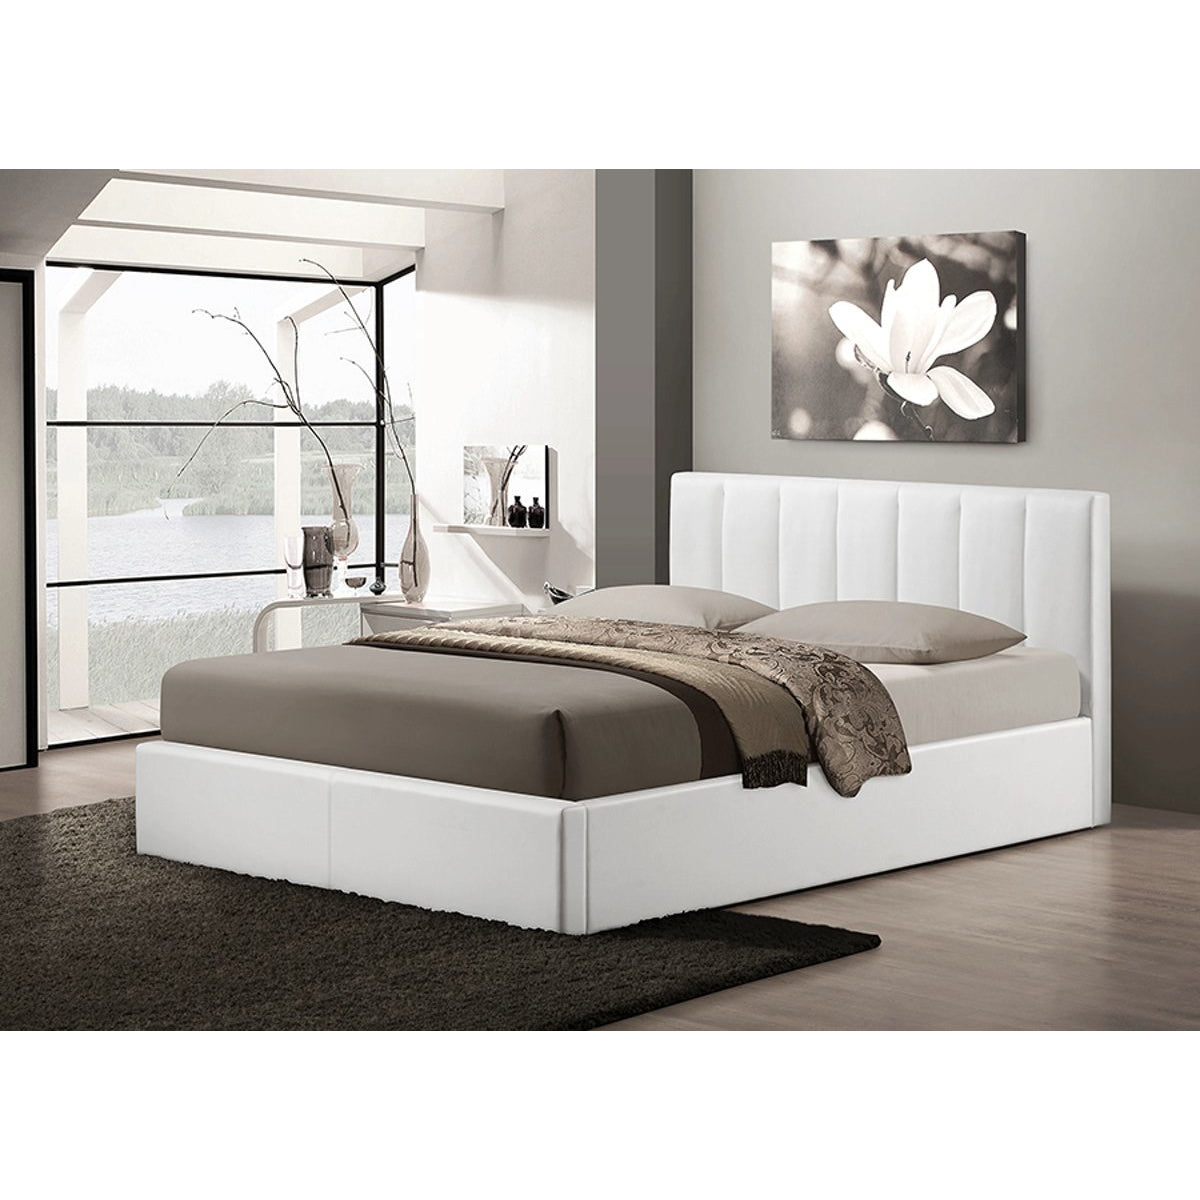 Baxton Studio Templemore White Leather Contemporary Queen-Size Bed Baxton Studio-Queen Headboard-Minimal And Modern - 3